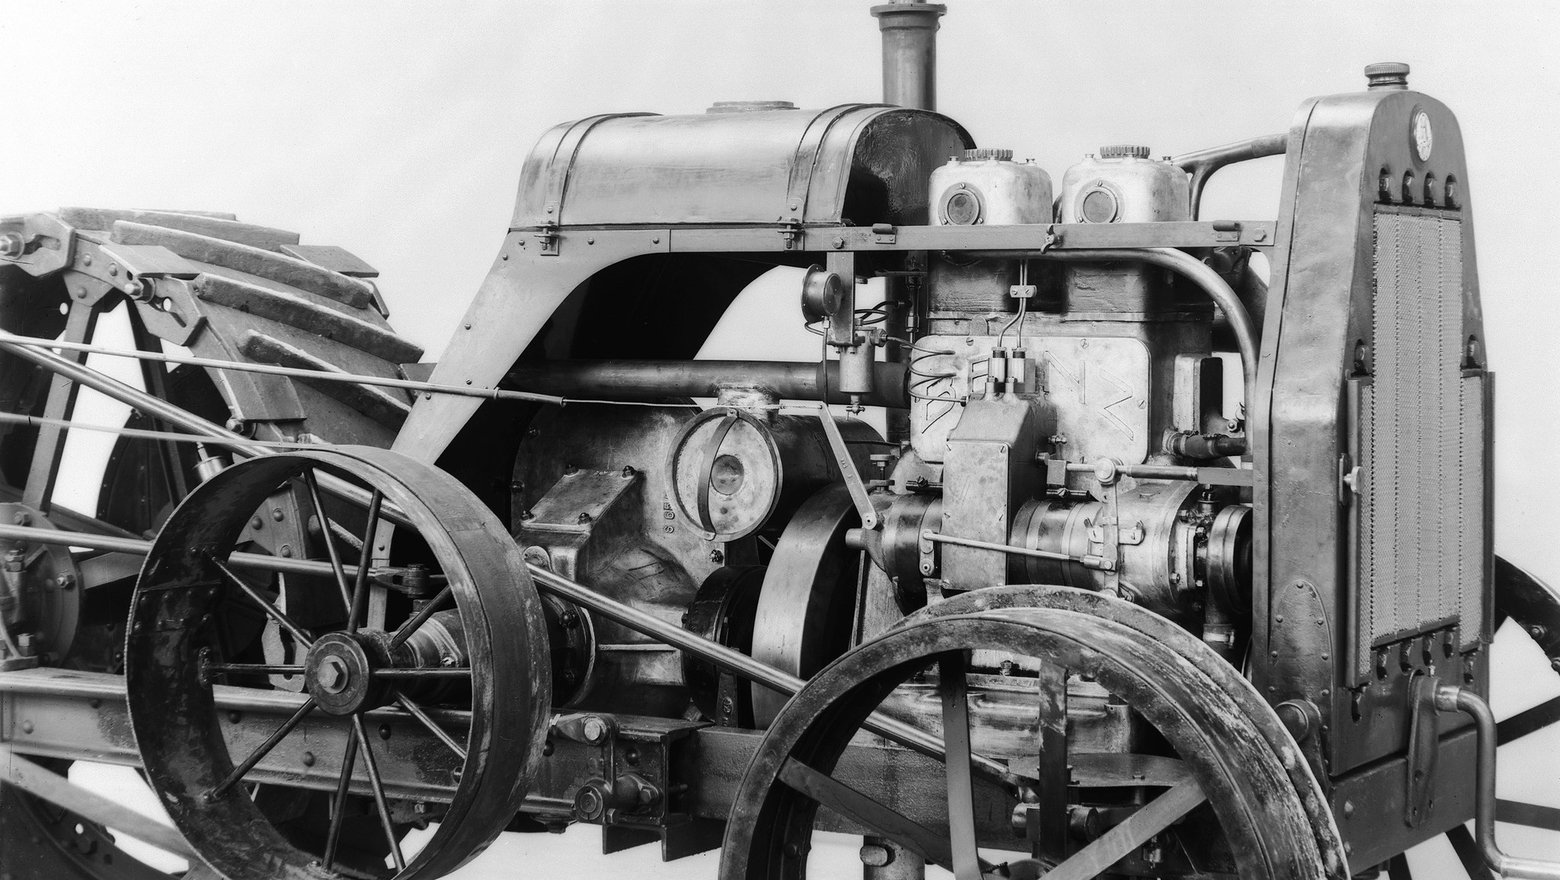 The Benz & Cie. Board of Management commissions an initial test series for pre-chamber diesel engines. The two-cylinder four-stroke engines produce 25 hp / 18 kW at 800 rpm and are fitted into three Benz-Sendling S 6 motorised ploughs. Testing is so succes